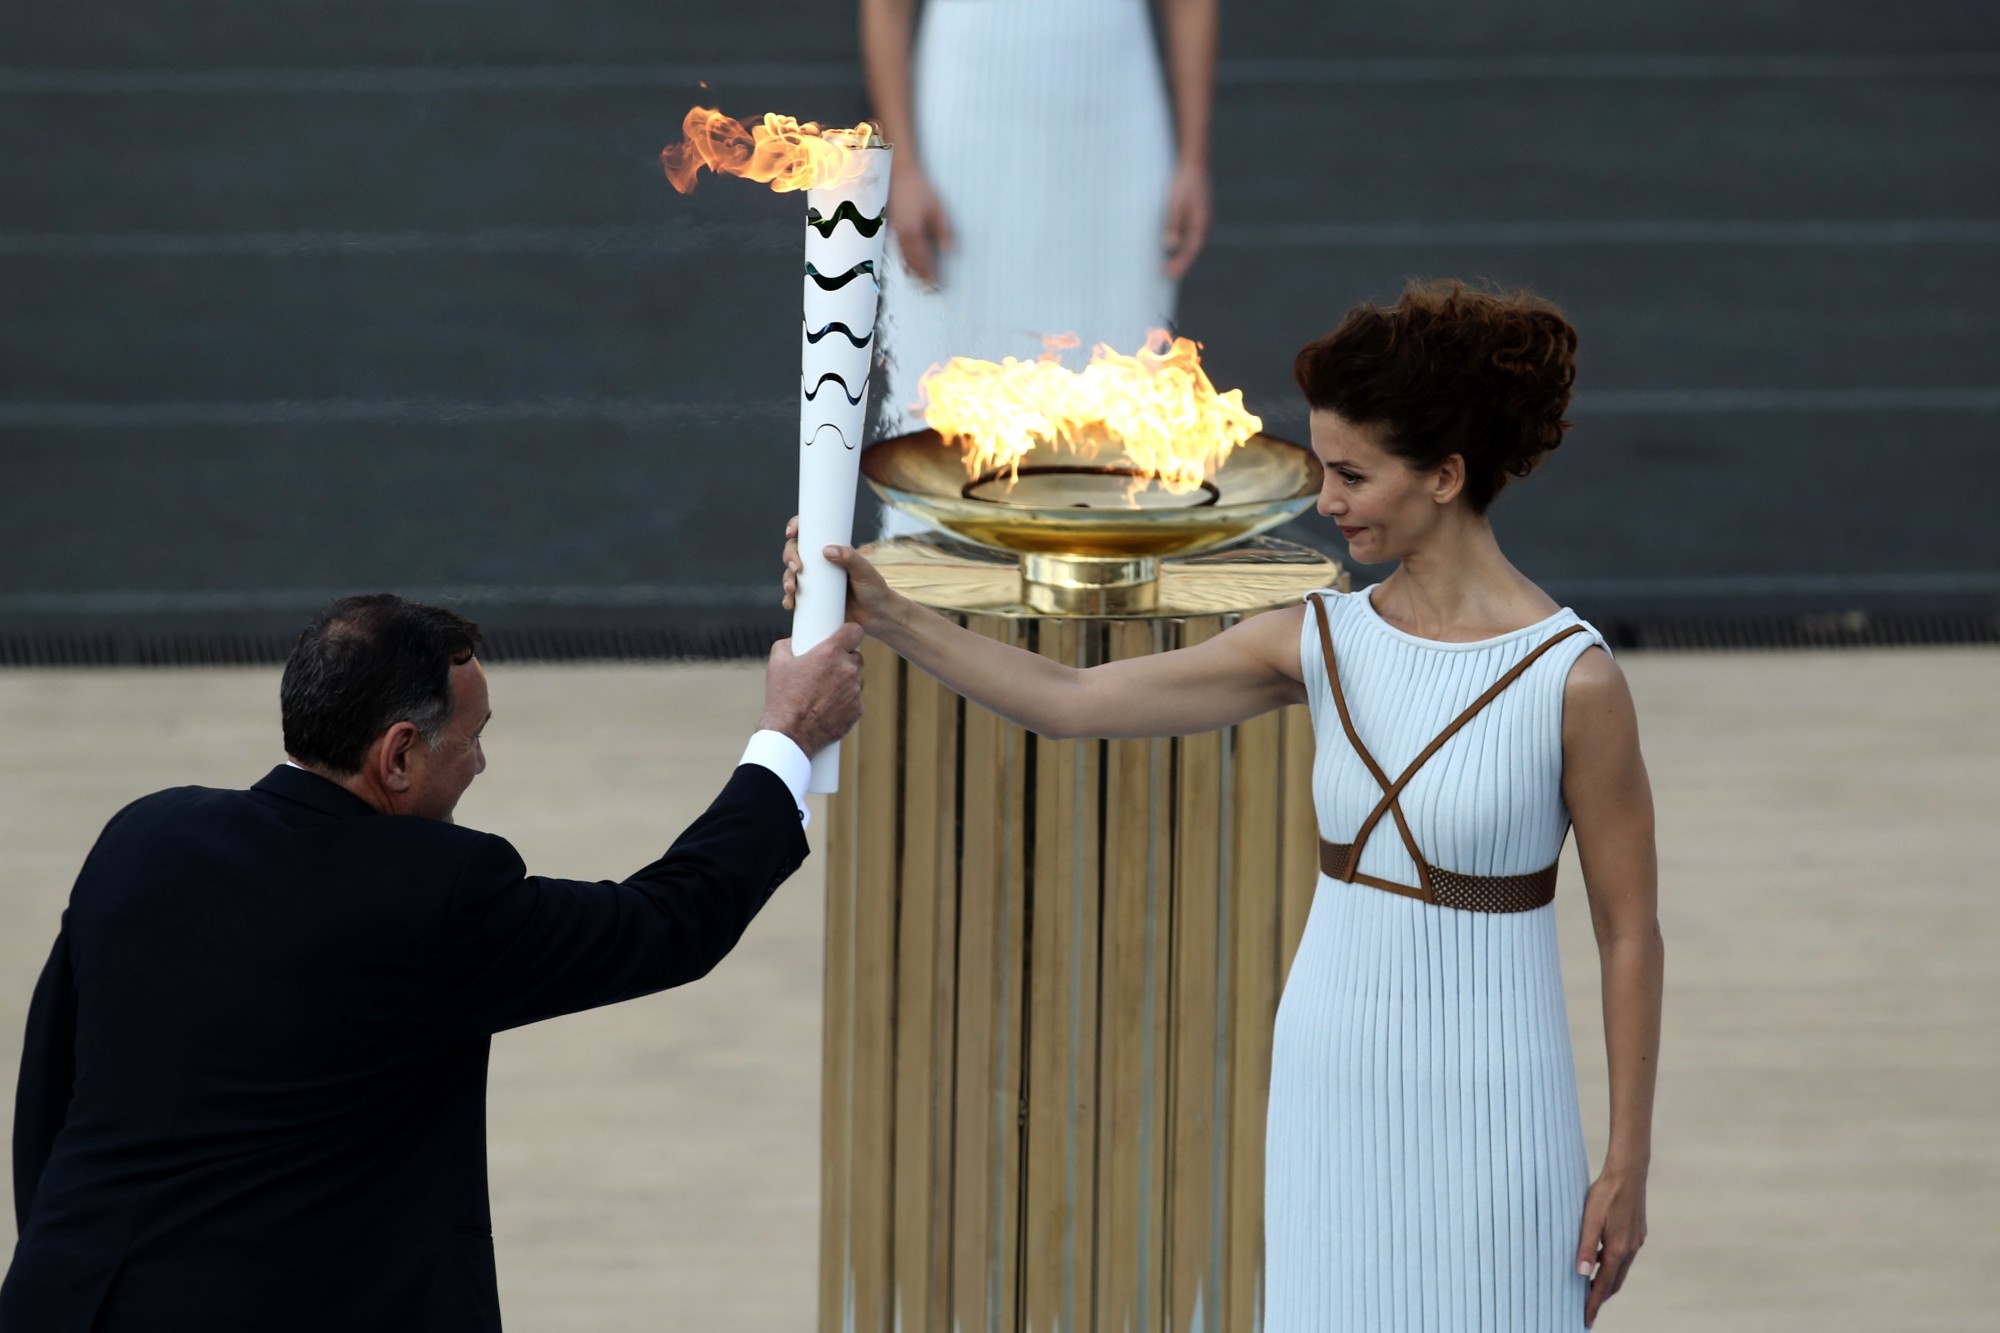 Olympic flame handover ceremony at the Panathenaic stadium in Athens